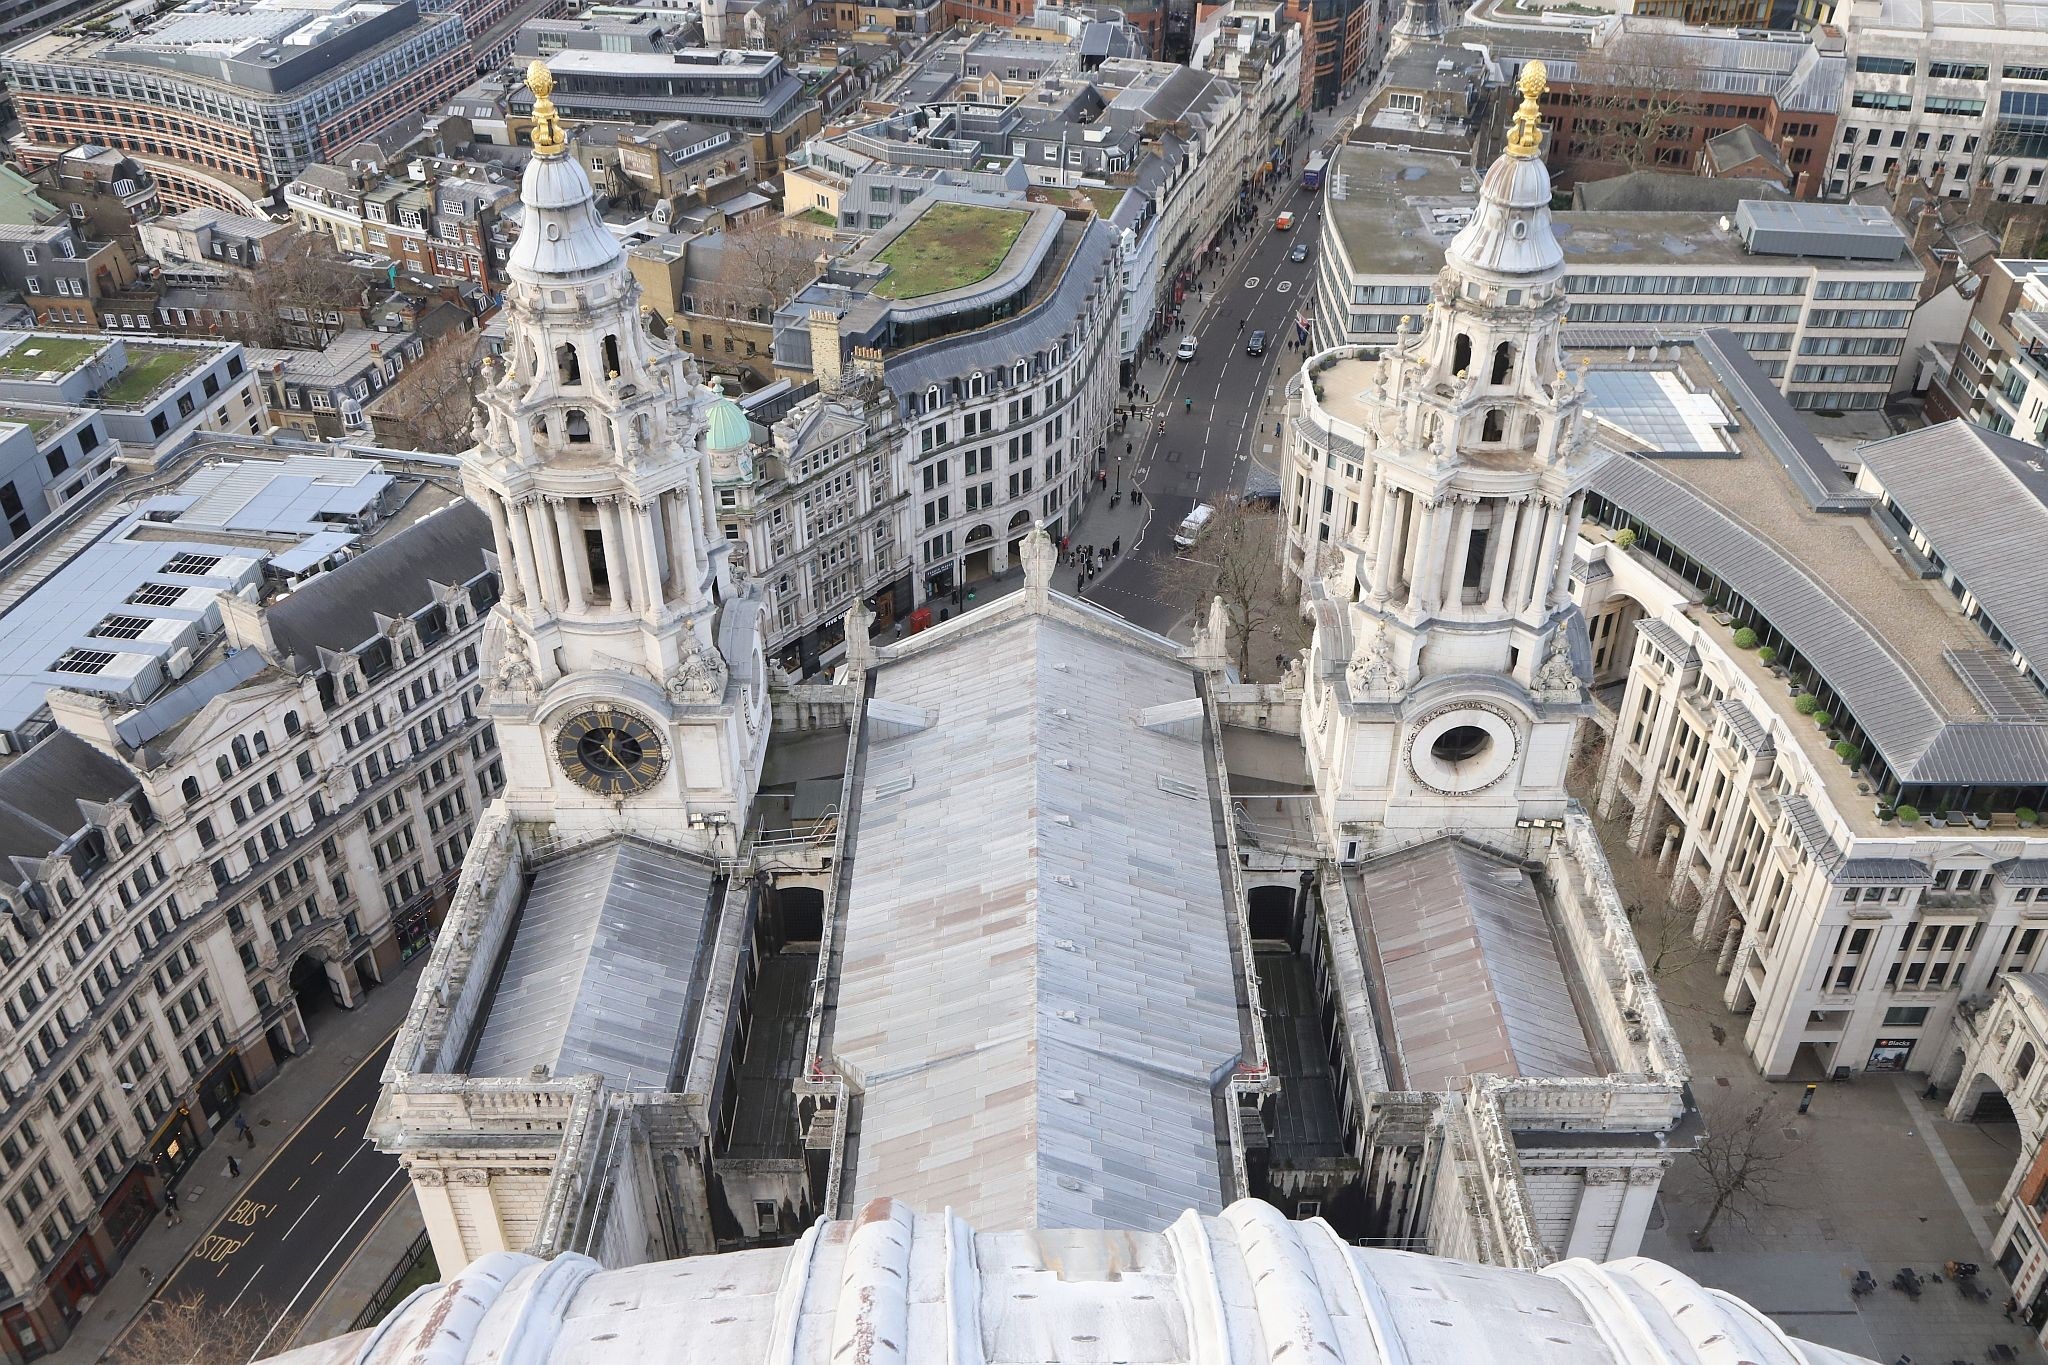 The roof of St. Paul's cathedral seen from the Golden Gallery on the top of the dome showing the bell towers, nave roof, library roof and roof of the room containing the Great Model. 2023.